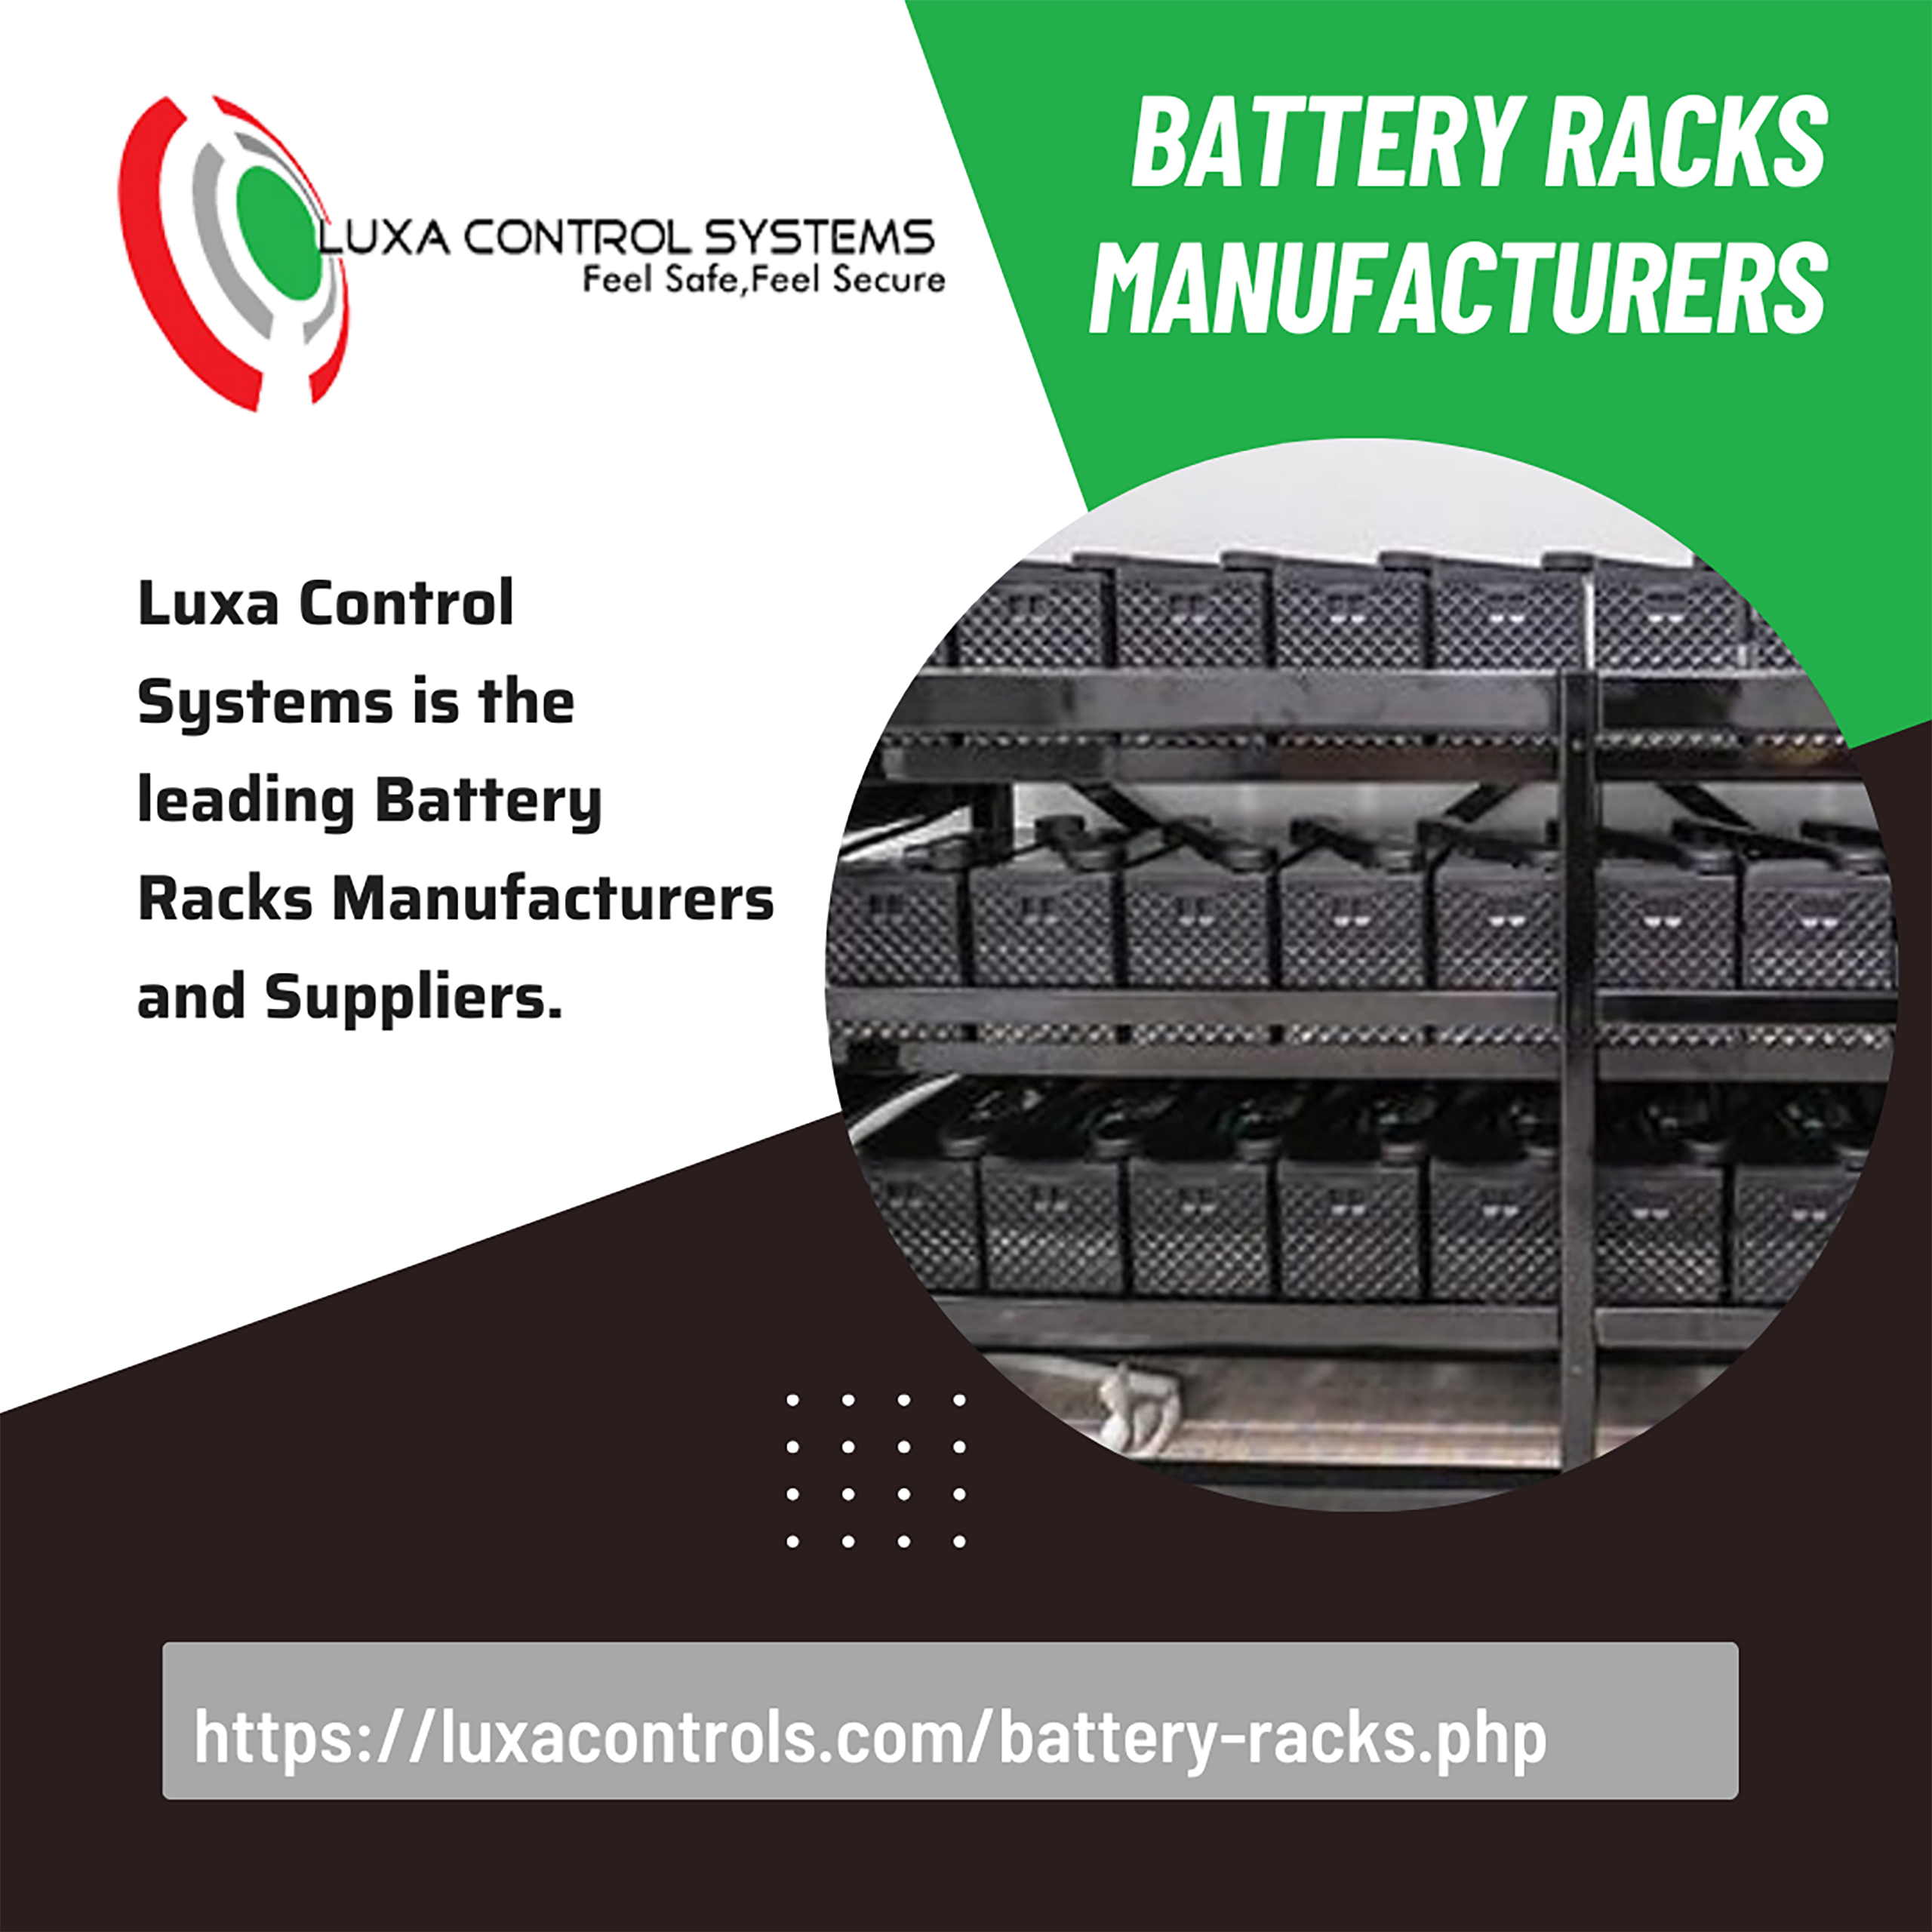 \ BATTERY RACKS
je TET

Luxa Control grocpeenrrr ies EE
INPUT, DIITICNN,  NHNHIN, MH CH EX :
Systems is the

leading Battery ow —
Racks Manufacturers |

and Suppliers.

ON oP BEE RIES Ars